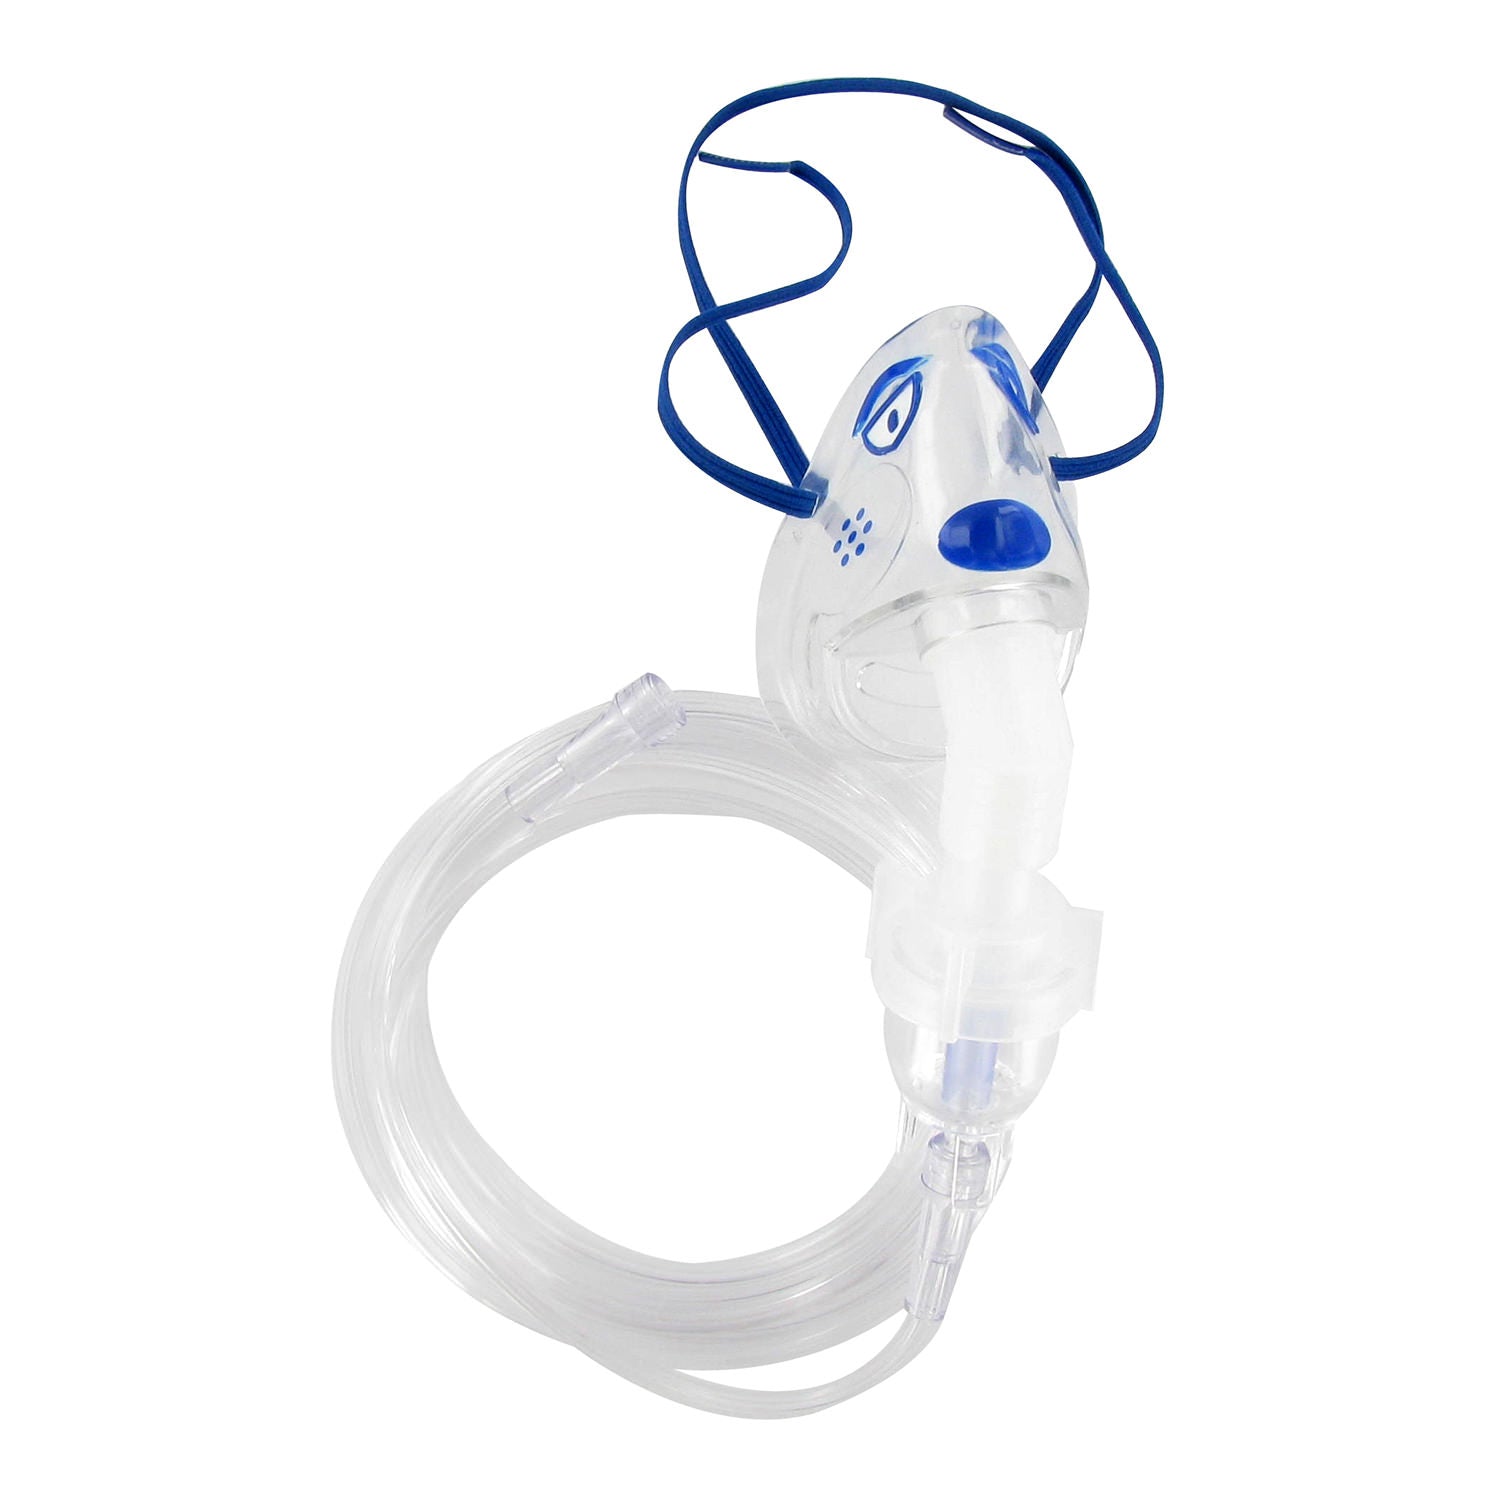 Reusable Pediatric Character Mask with Optional Nebulizer Kit-Dragon Mask Only